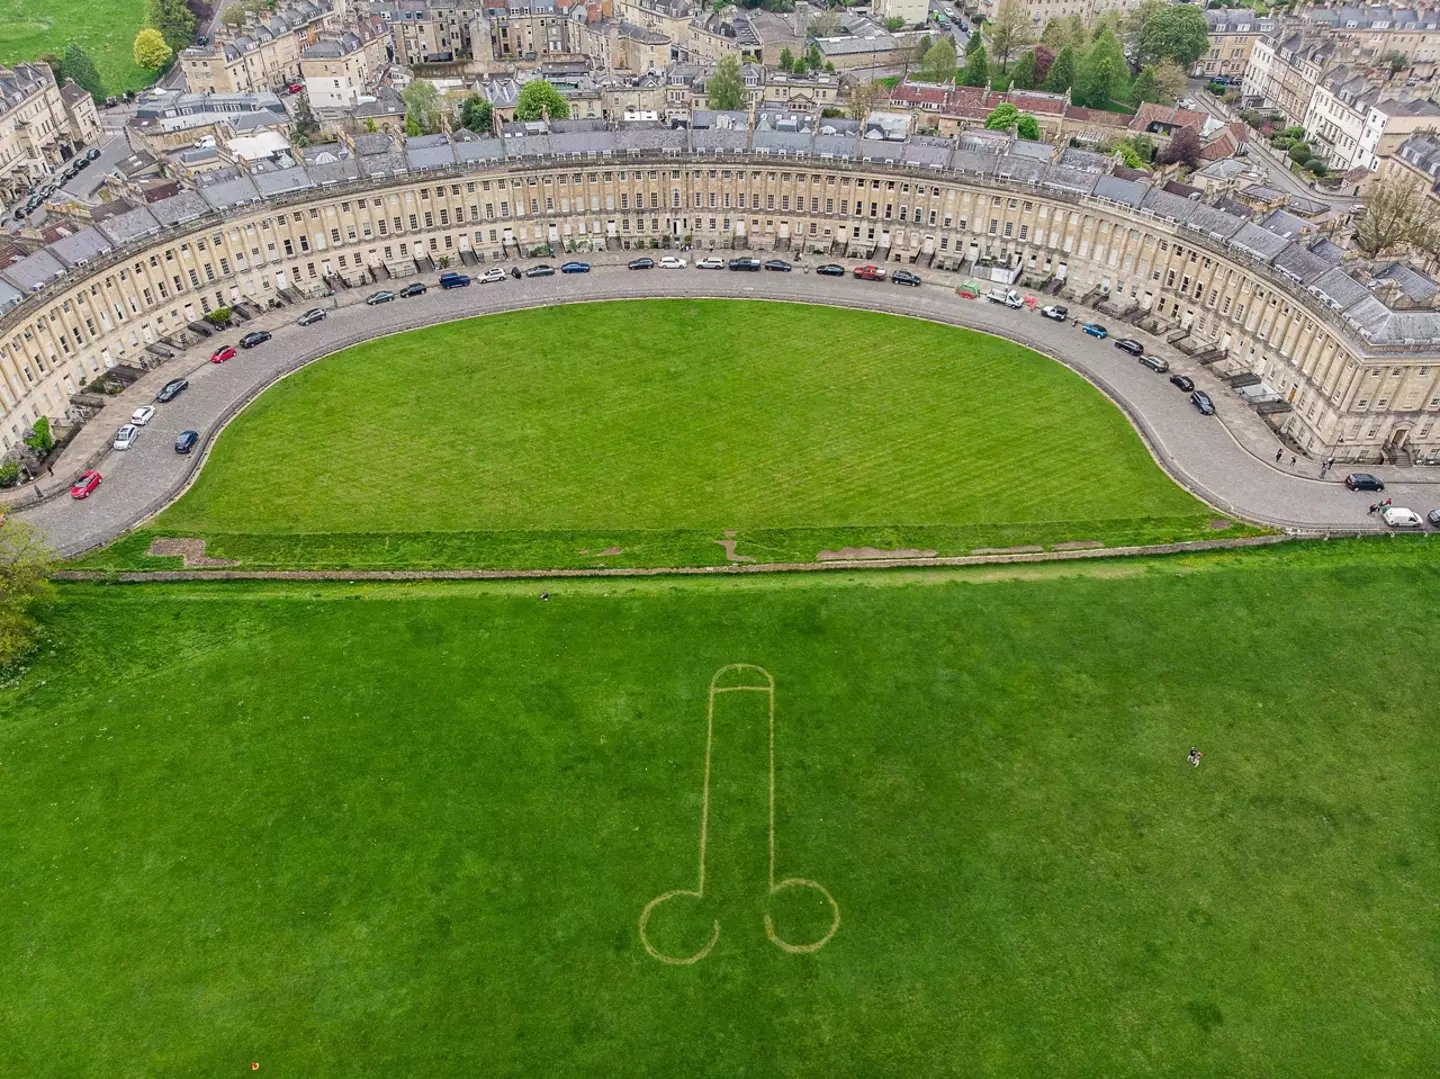 A giant penis has appeared at King Charles' coronation party site - the news no royalist really wants to hear.